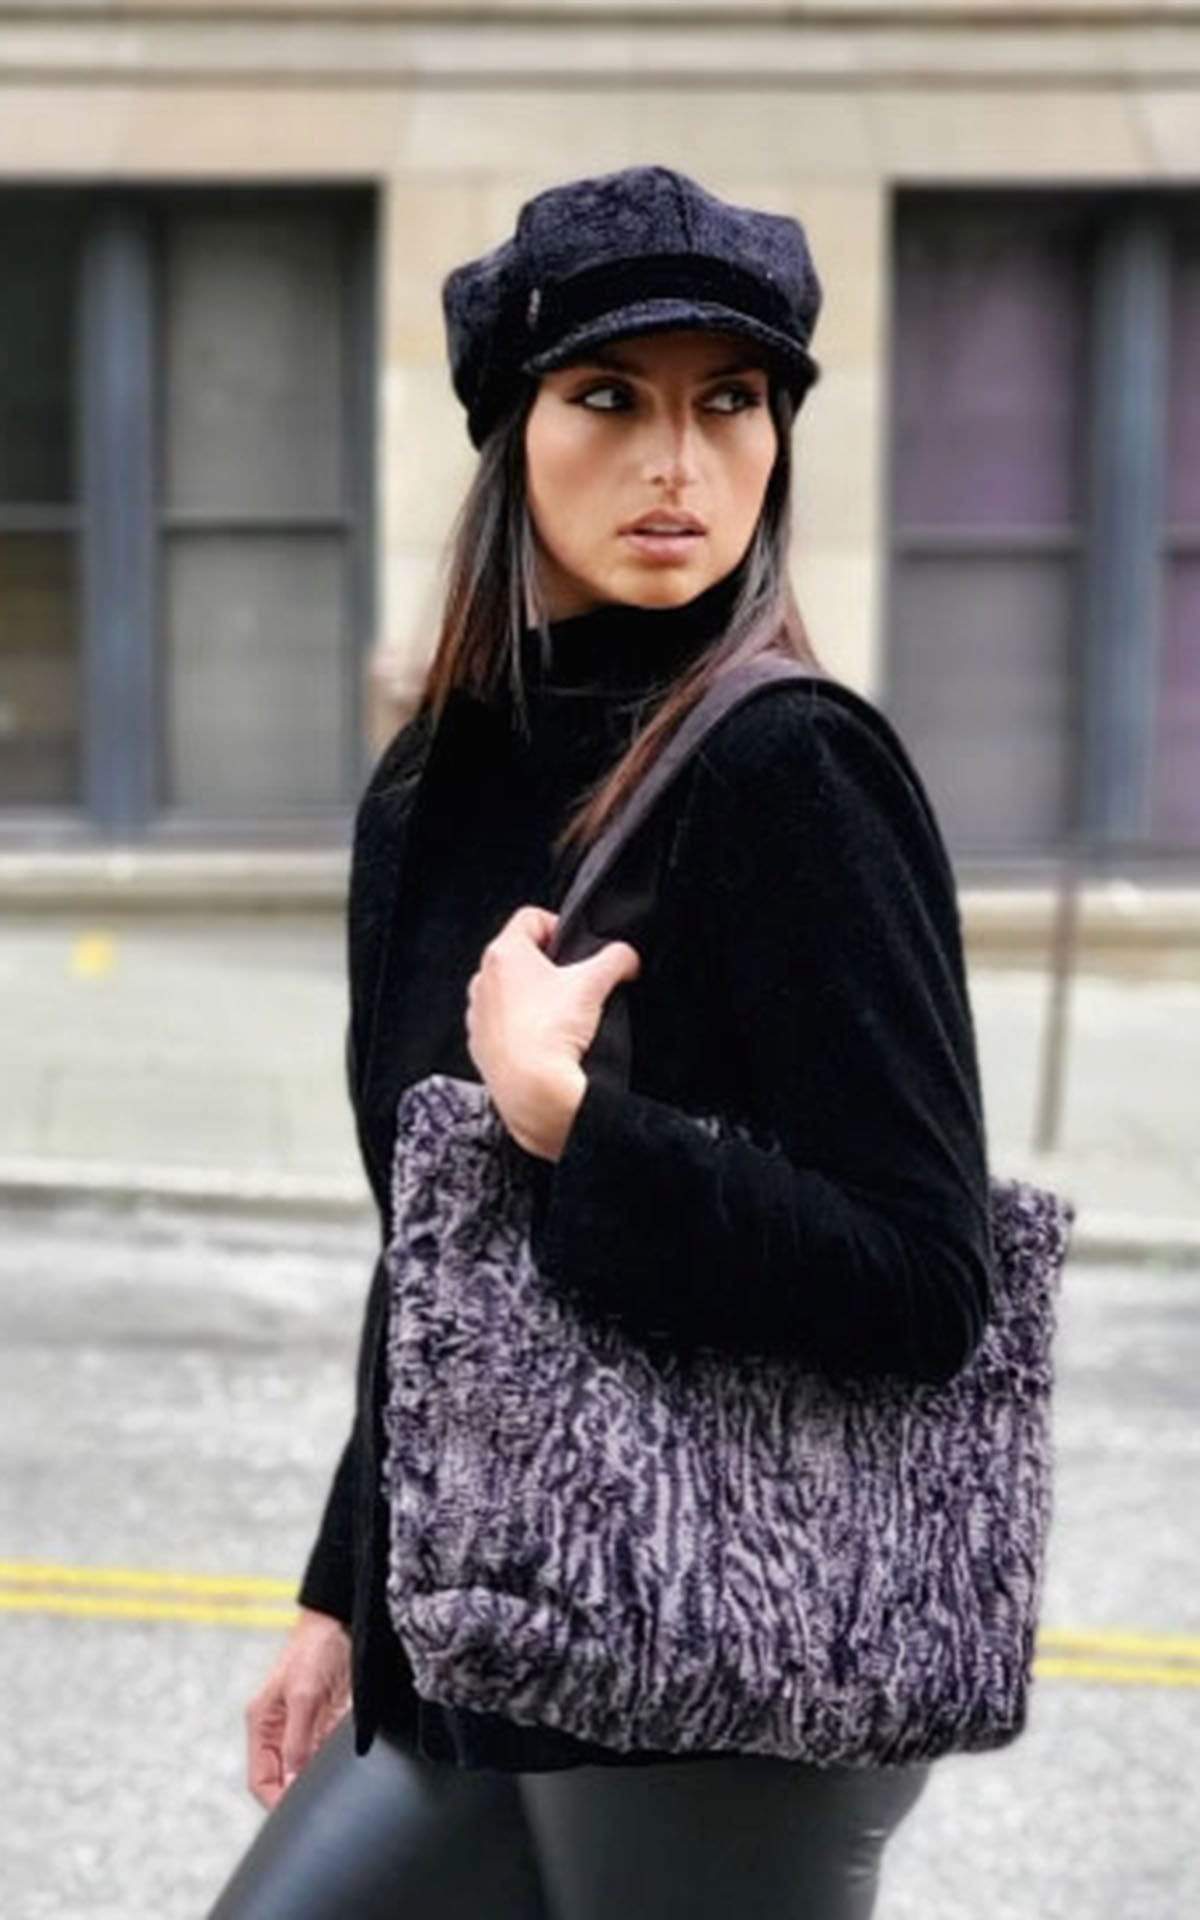 A model wearing a Valerie Cap Style hat in Pebbles in Black with Black Velvet Band with Siberian Lynx Tote bag.  Handmade in Seattle, WA USA by Pandemonium Millinery.